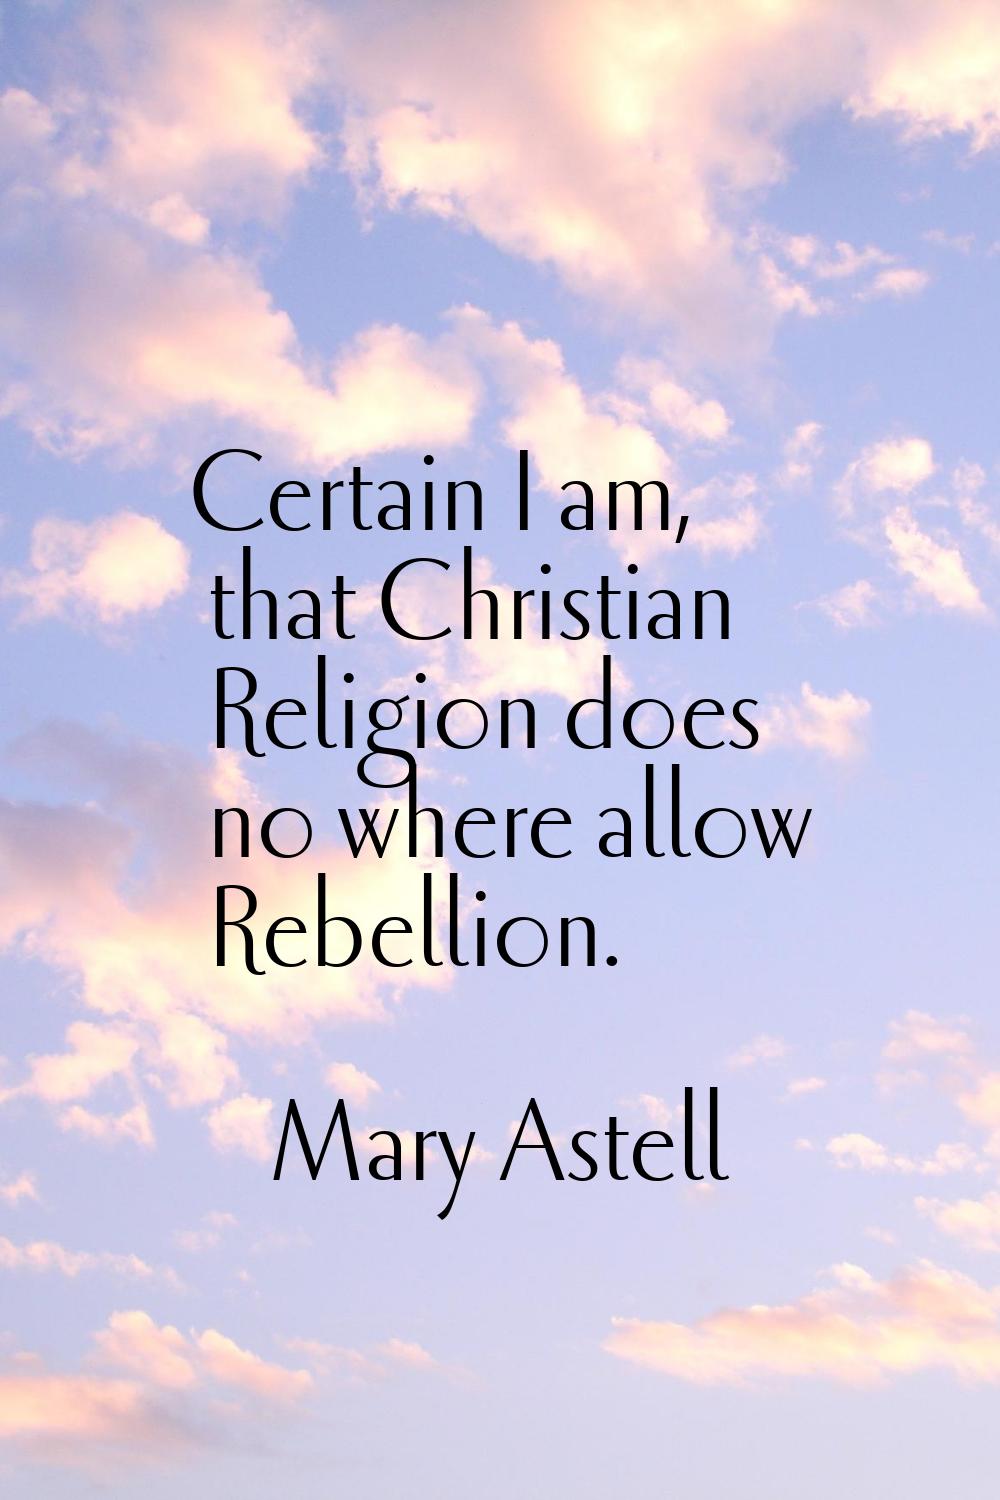 Certain I am, that Christian Religion does no where allow Rebellion.